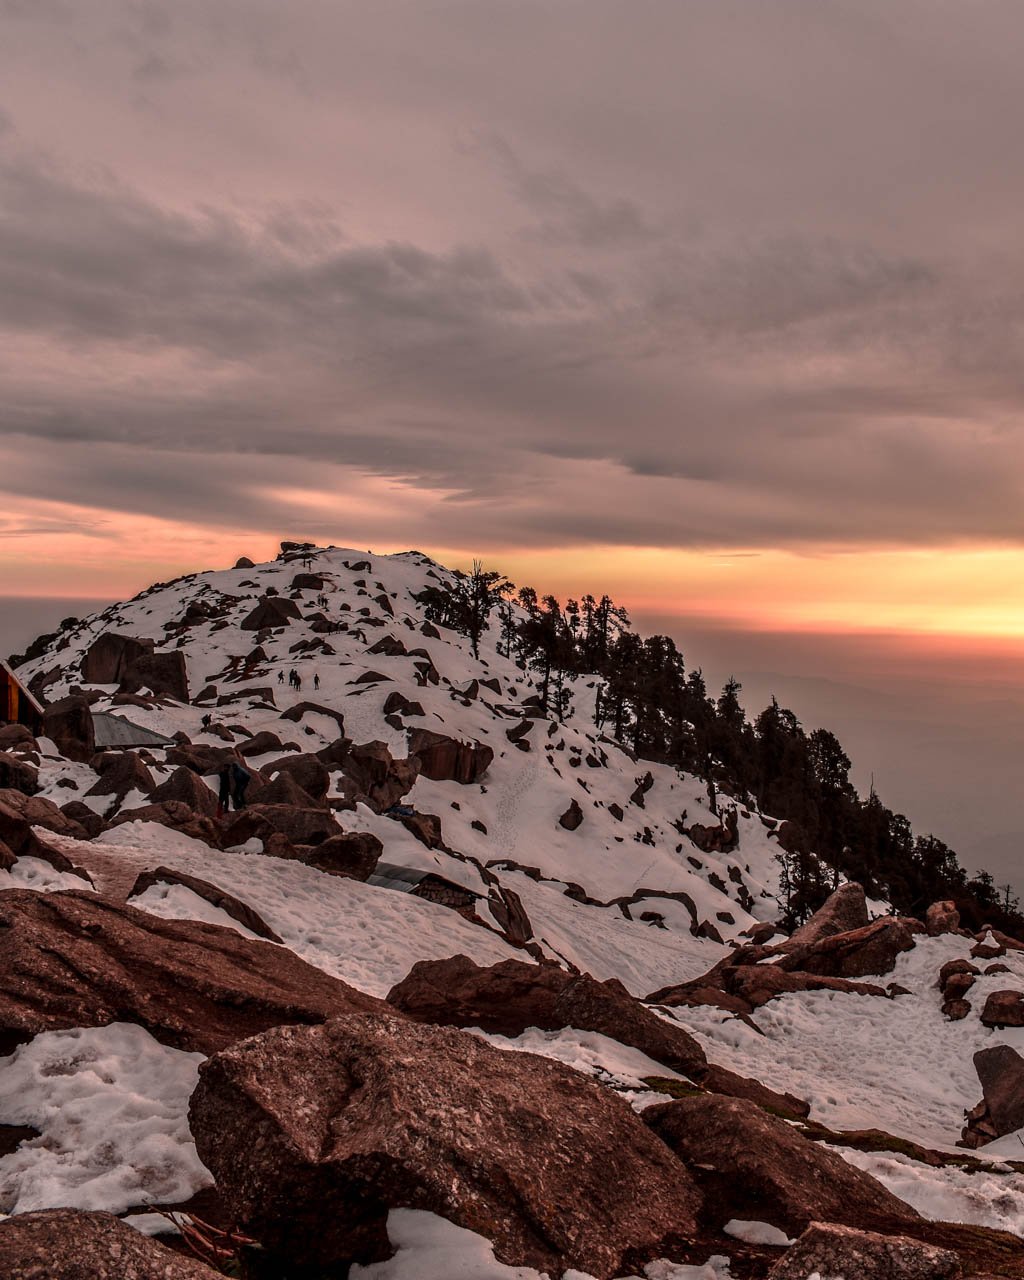 Camping at Triund hill